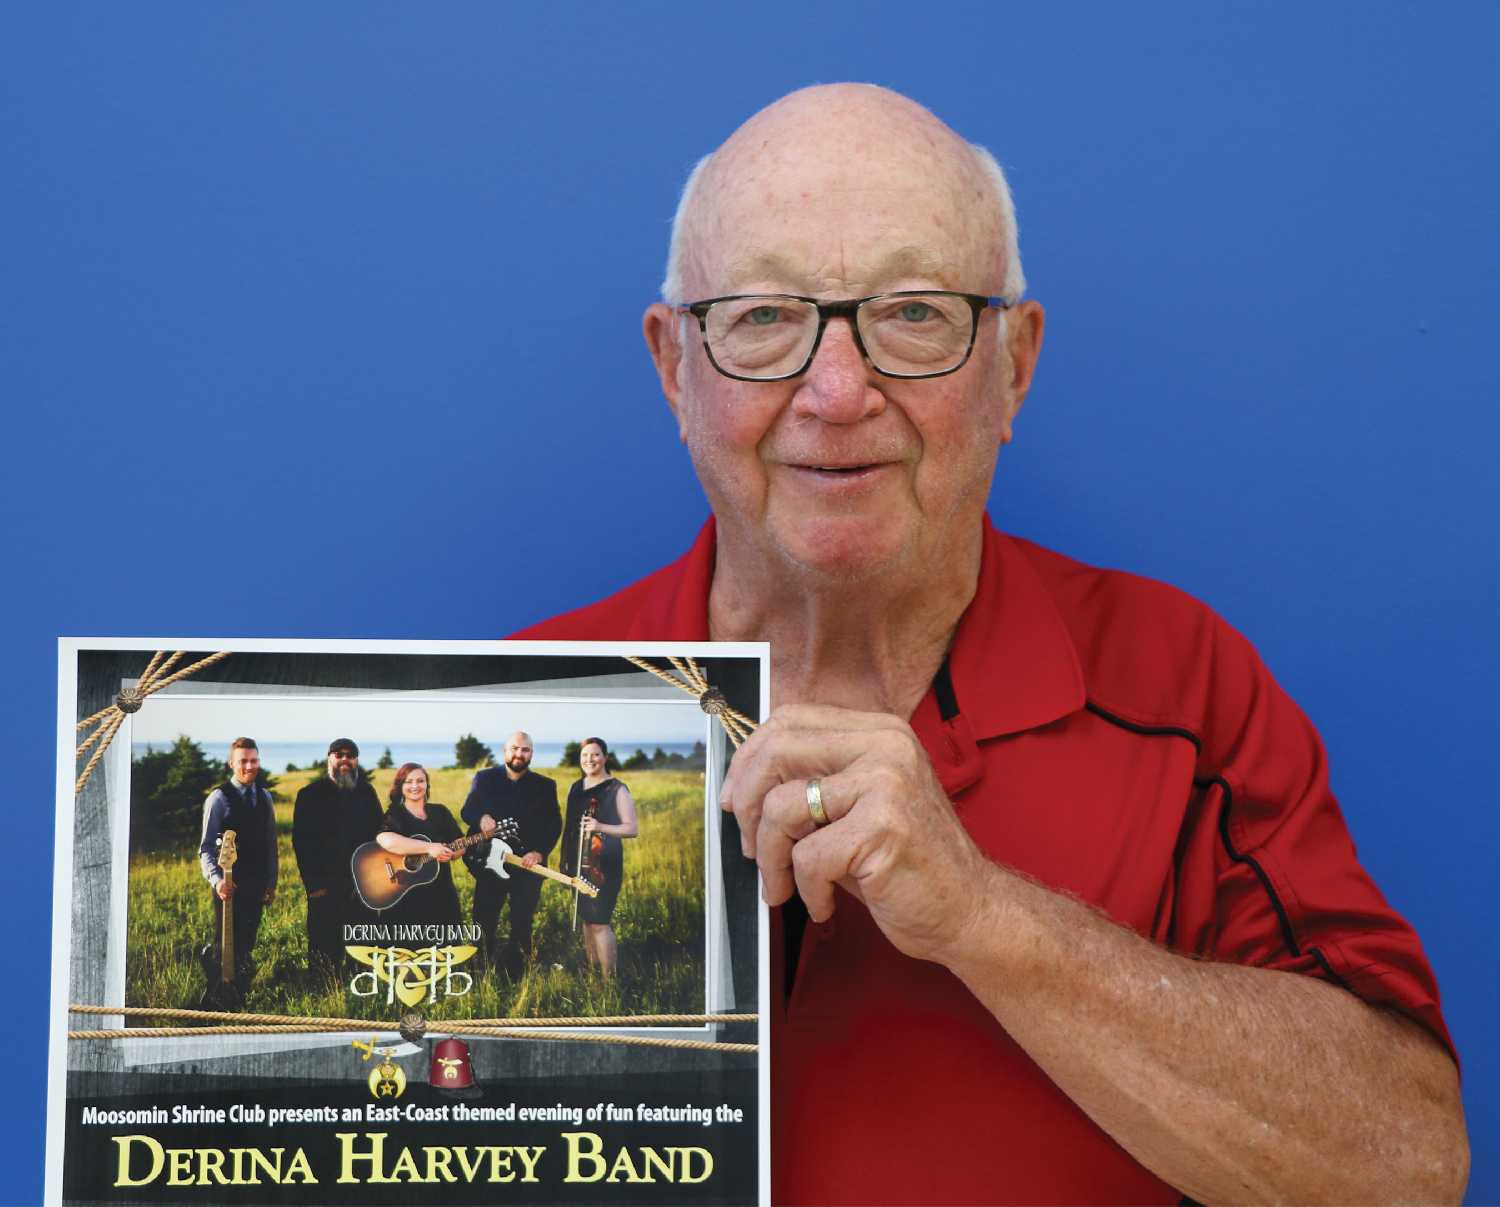 Bill Thorn holds up the poster for the Derina Harvey Band concert.